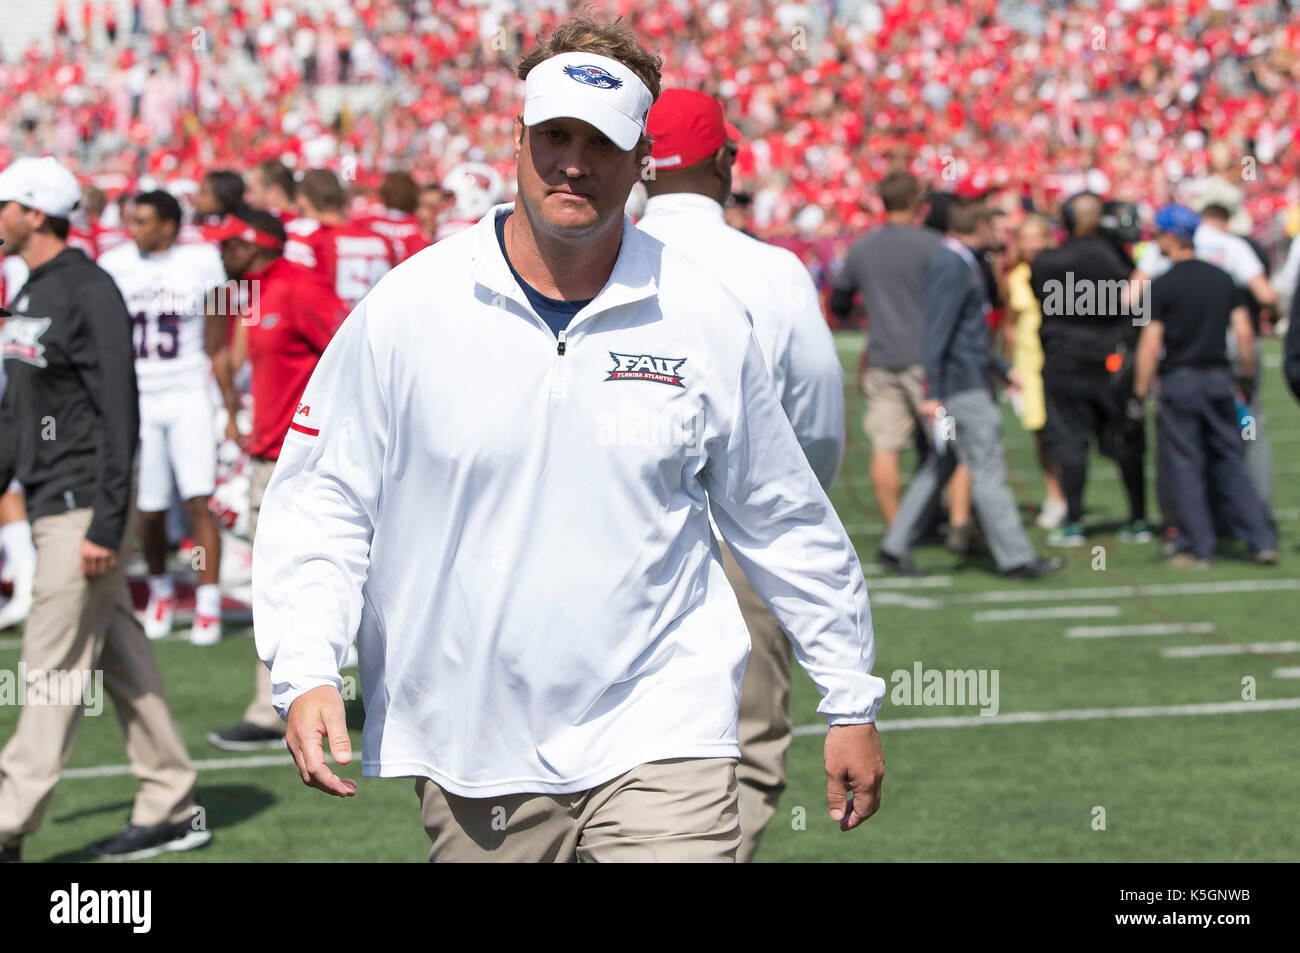 Madison, WI, USA. 9th Sep, 2017. Florida Atlantic head coach Lane Kiffin walks off the field after the NCAA Football game between the Florida Atlantic Owls and the Wisconsin Badgers at Camp Randall Stadium in Madison, WI. Wisconsin defeated Florida Atlantic 31-14. John Fisher/CSM/Alamy Live News Stock Photo